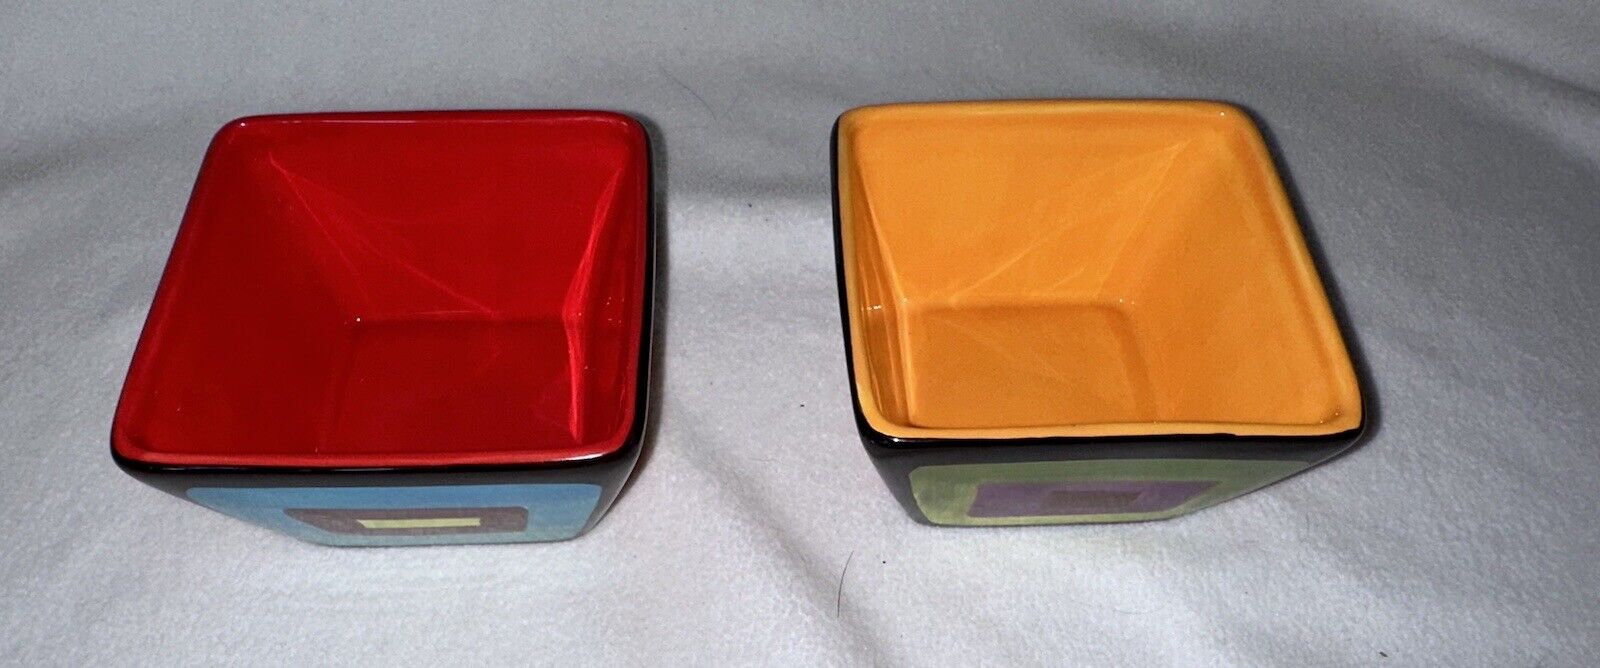 Naylor Designs Hand Painted Square Tasting Dip Square Bowls Lot Of 2